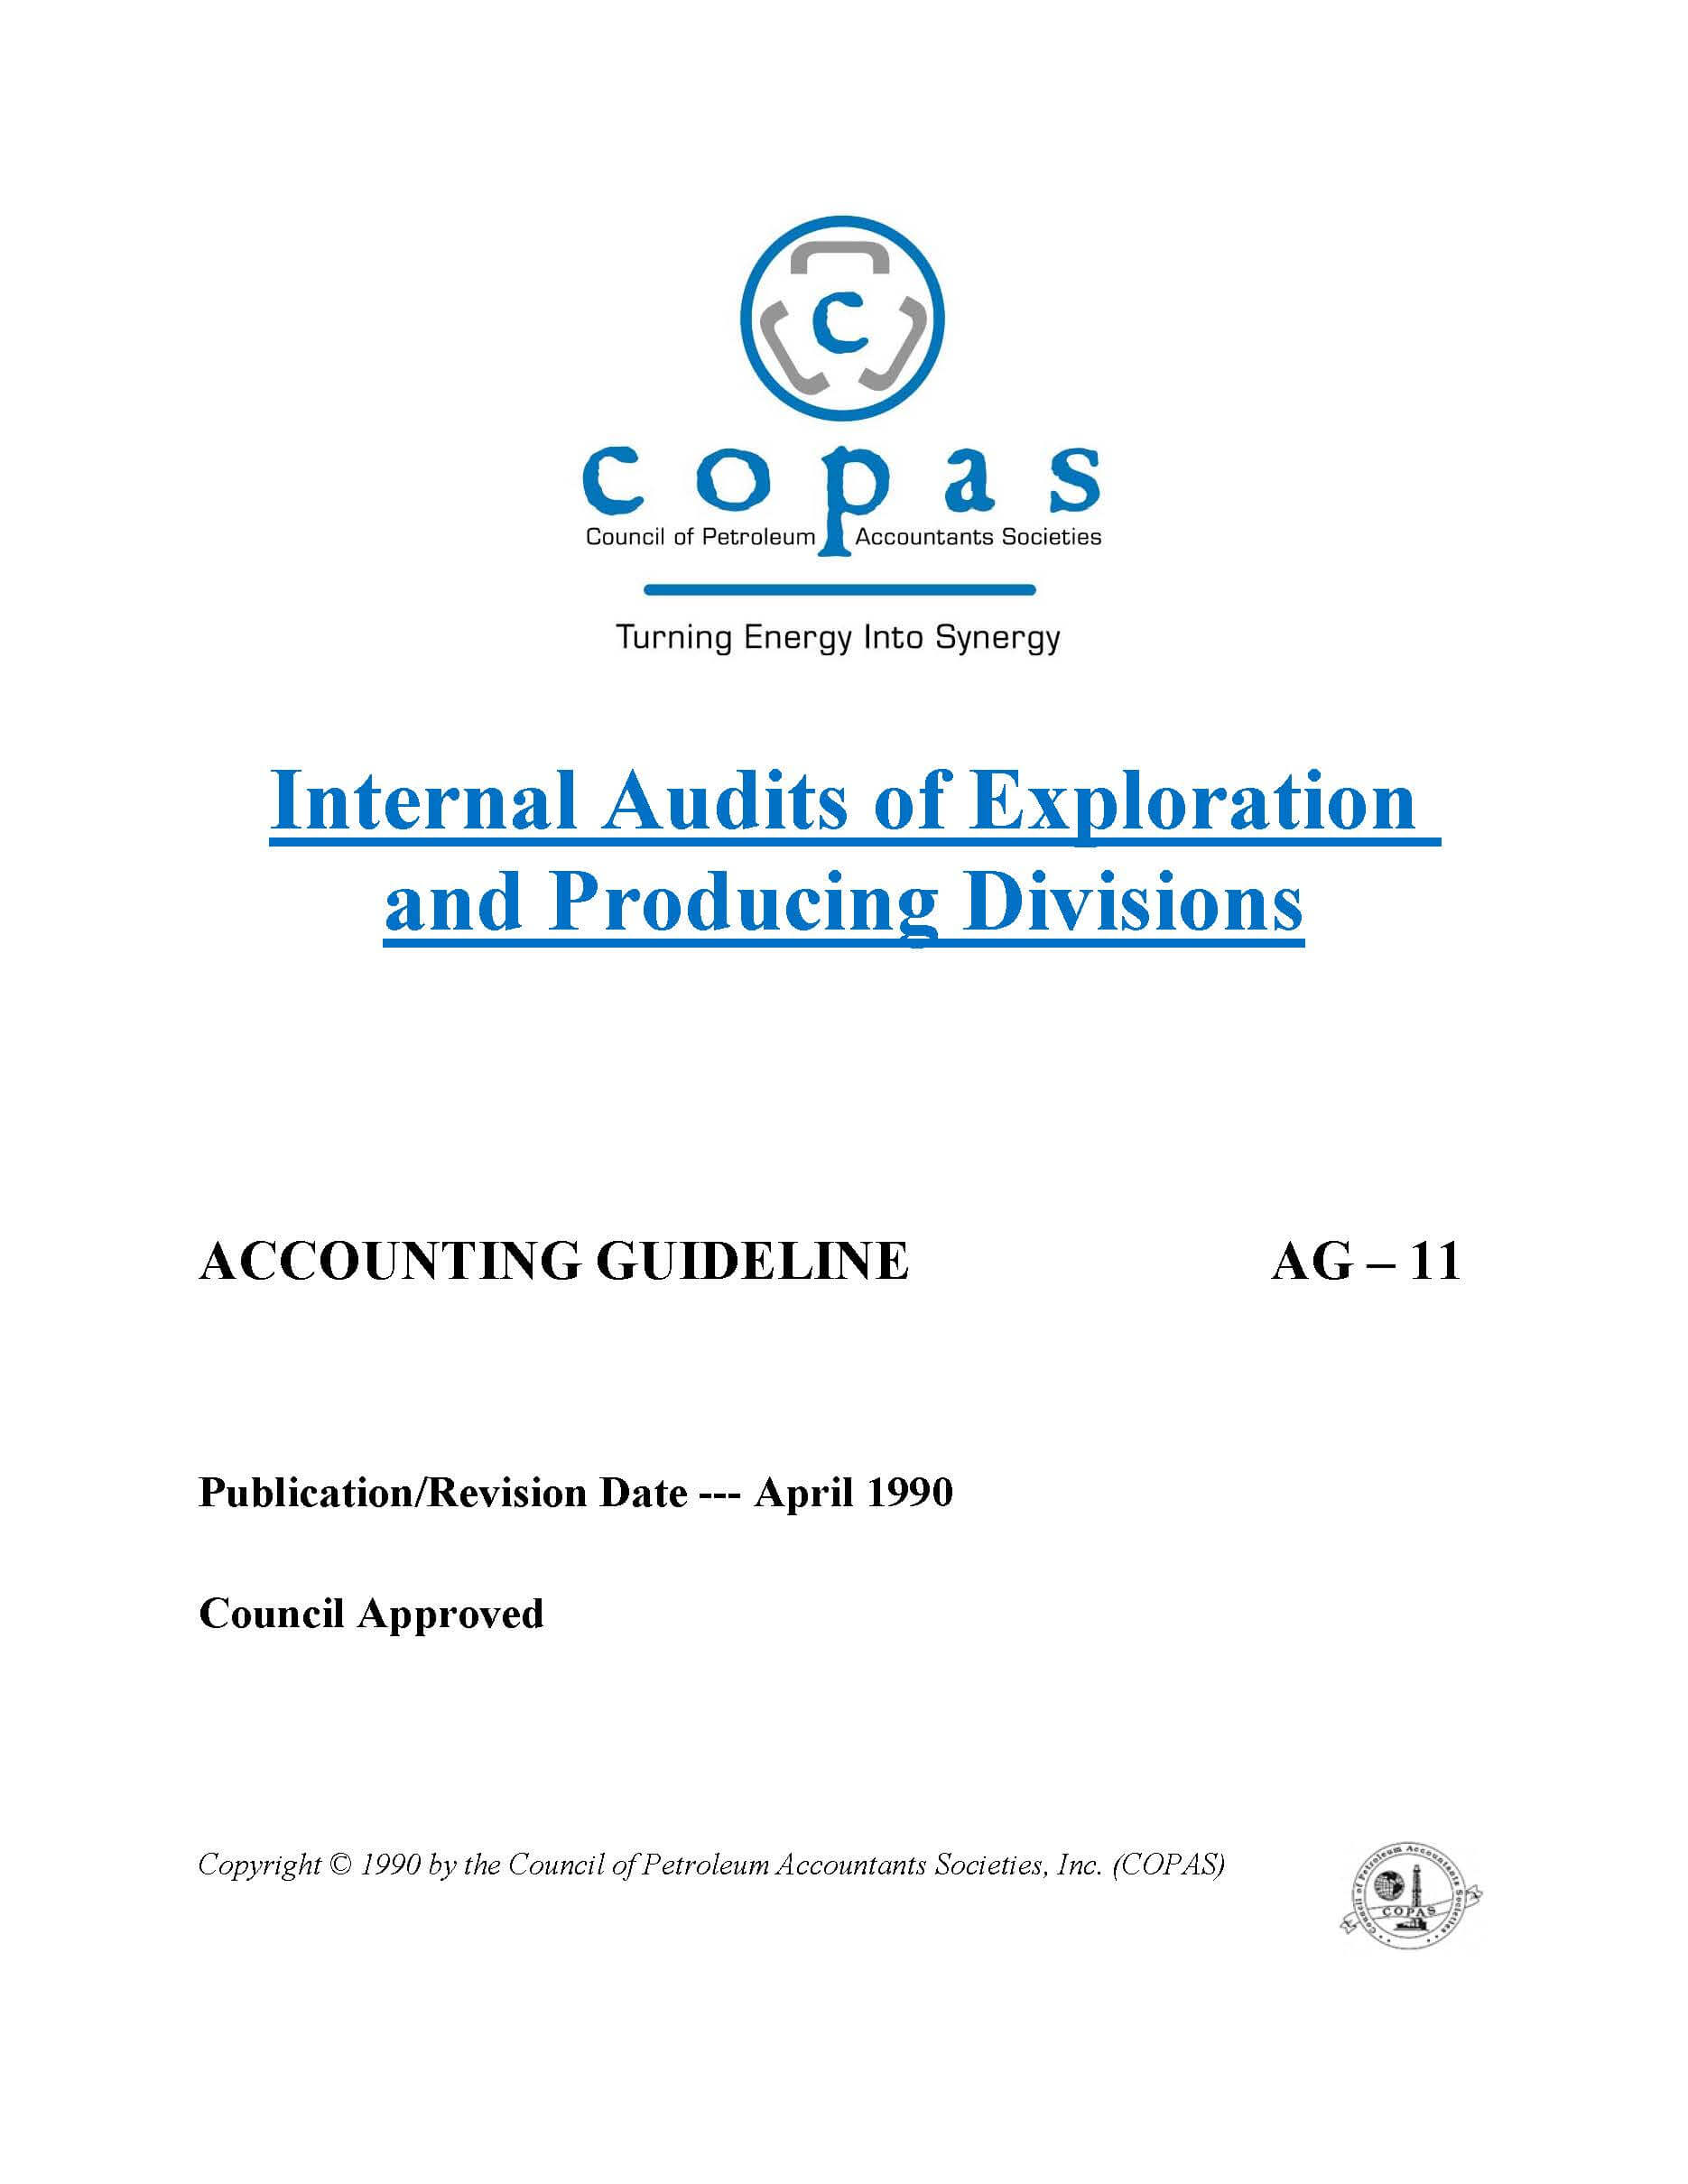 AG-11 Internal Audits of Exploration and Producing Divisions